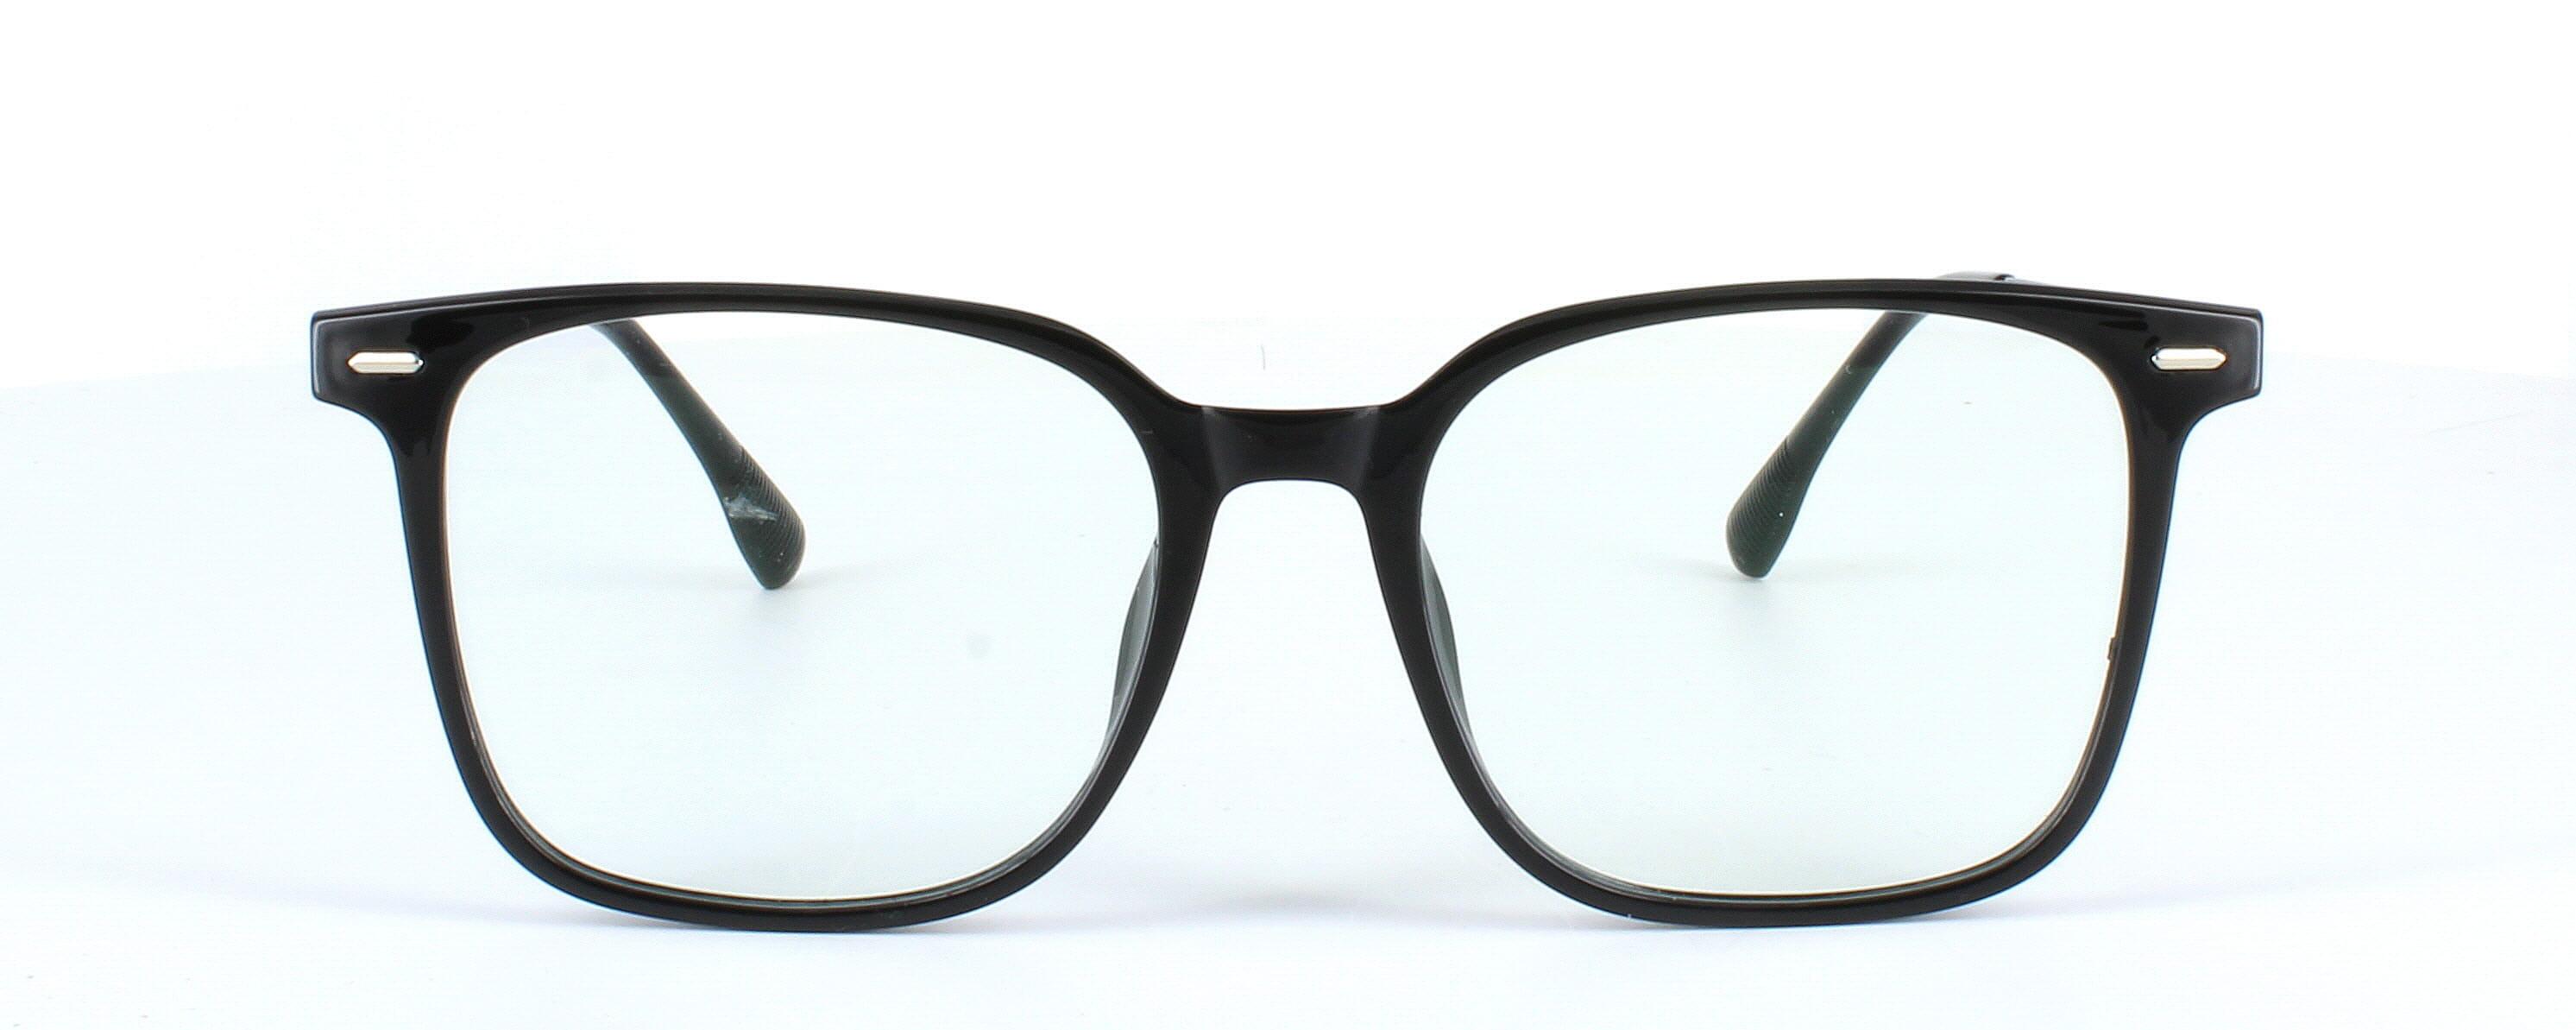 Edward Scotts ST6204 - Black - Gent's acetate retro style glasses frame with square shaped lenses and titanium arms - image view 2